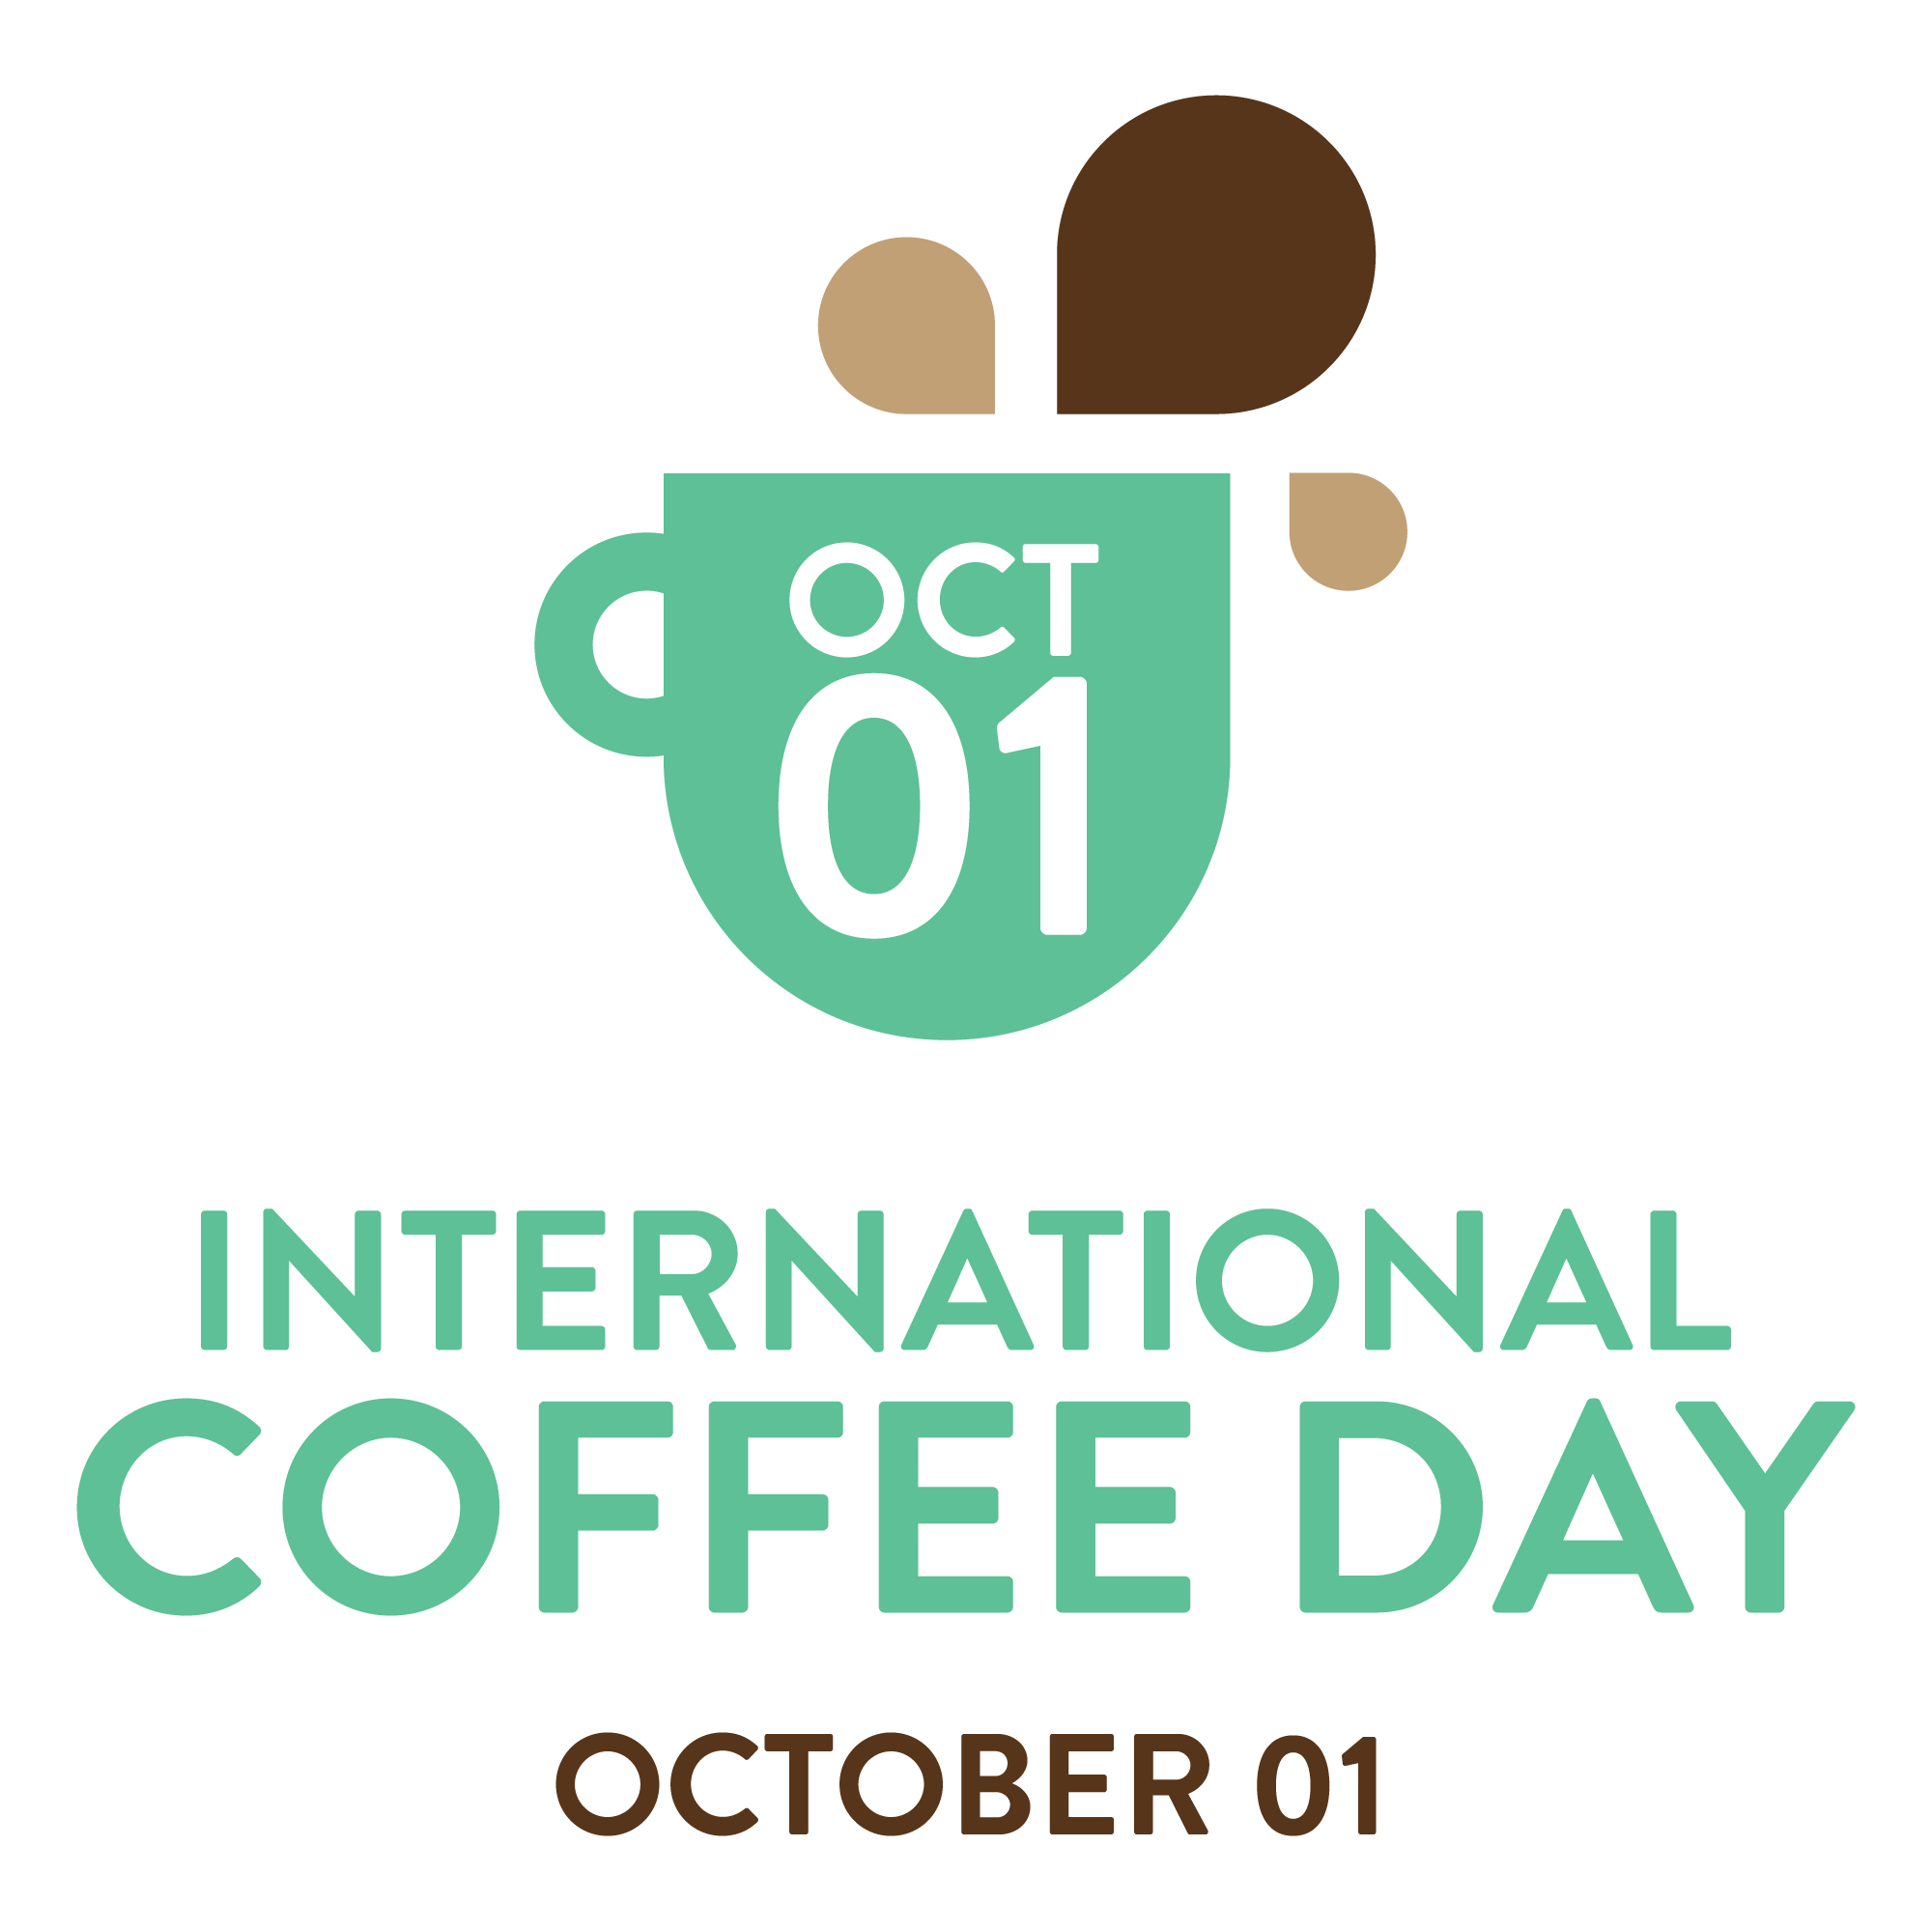 50+ Best International Coffee Day Greeting Images On Askideas